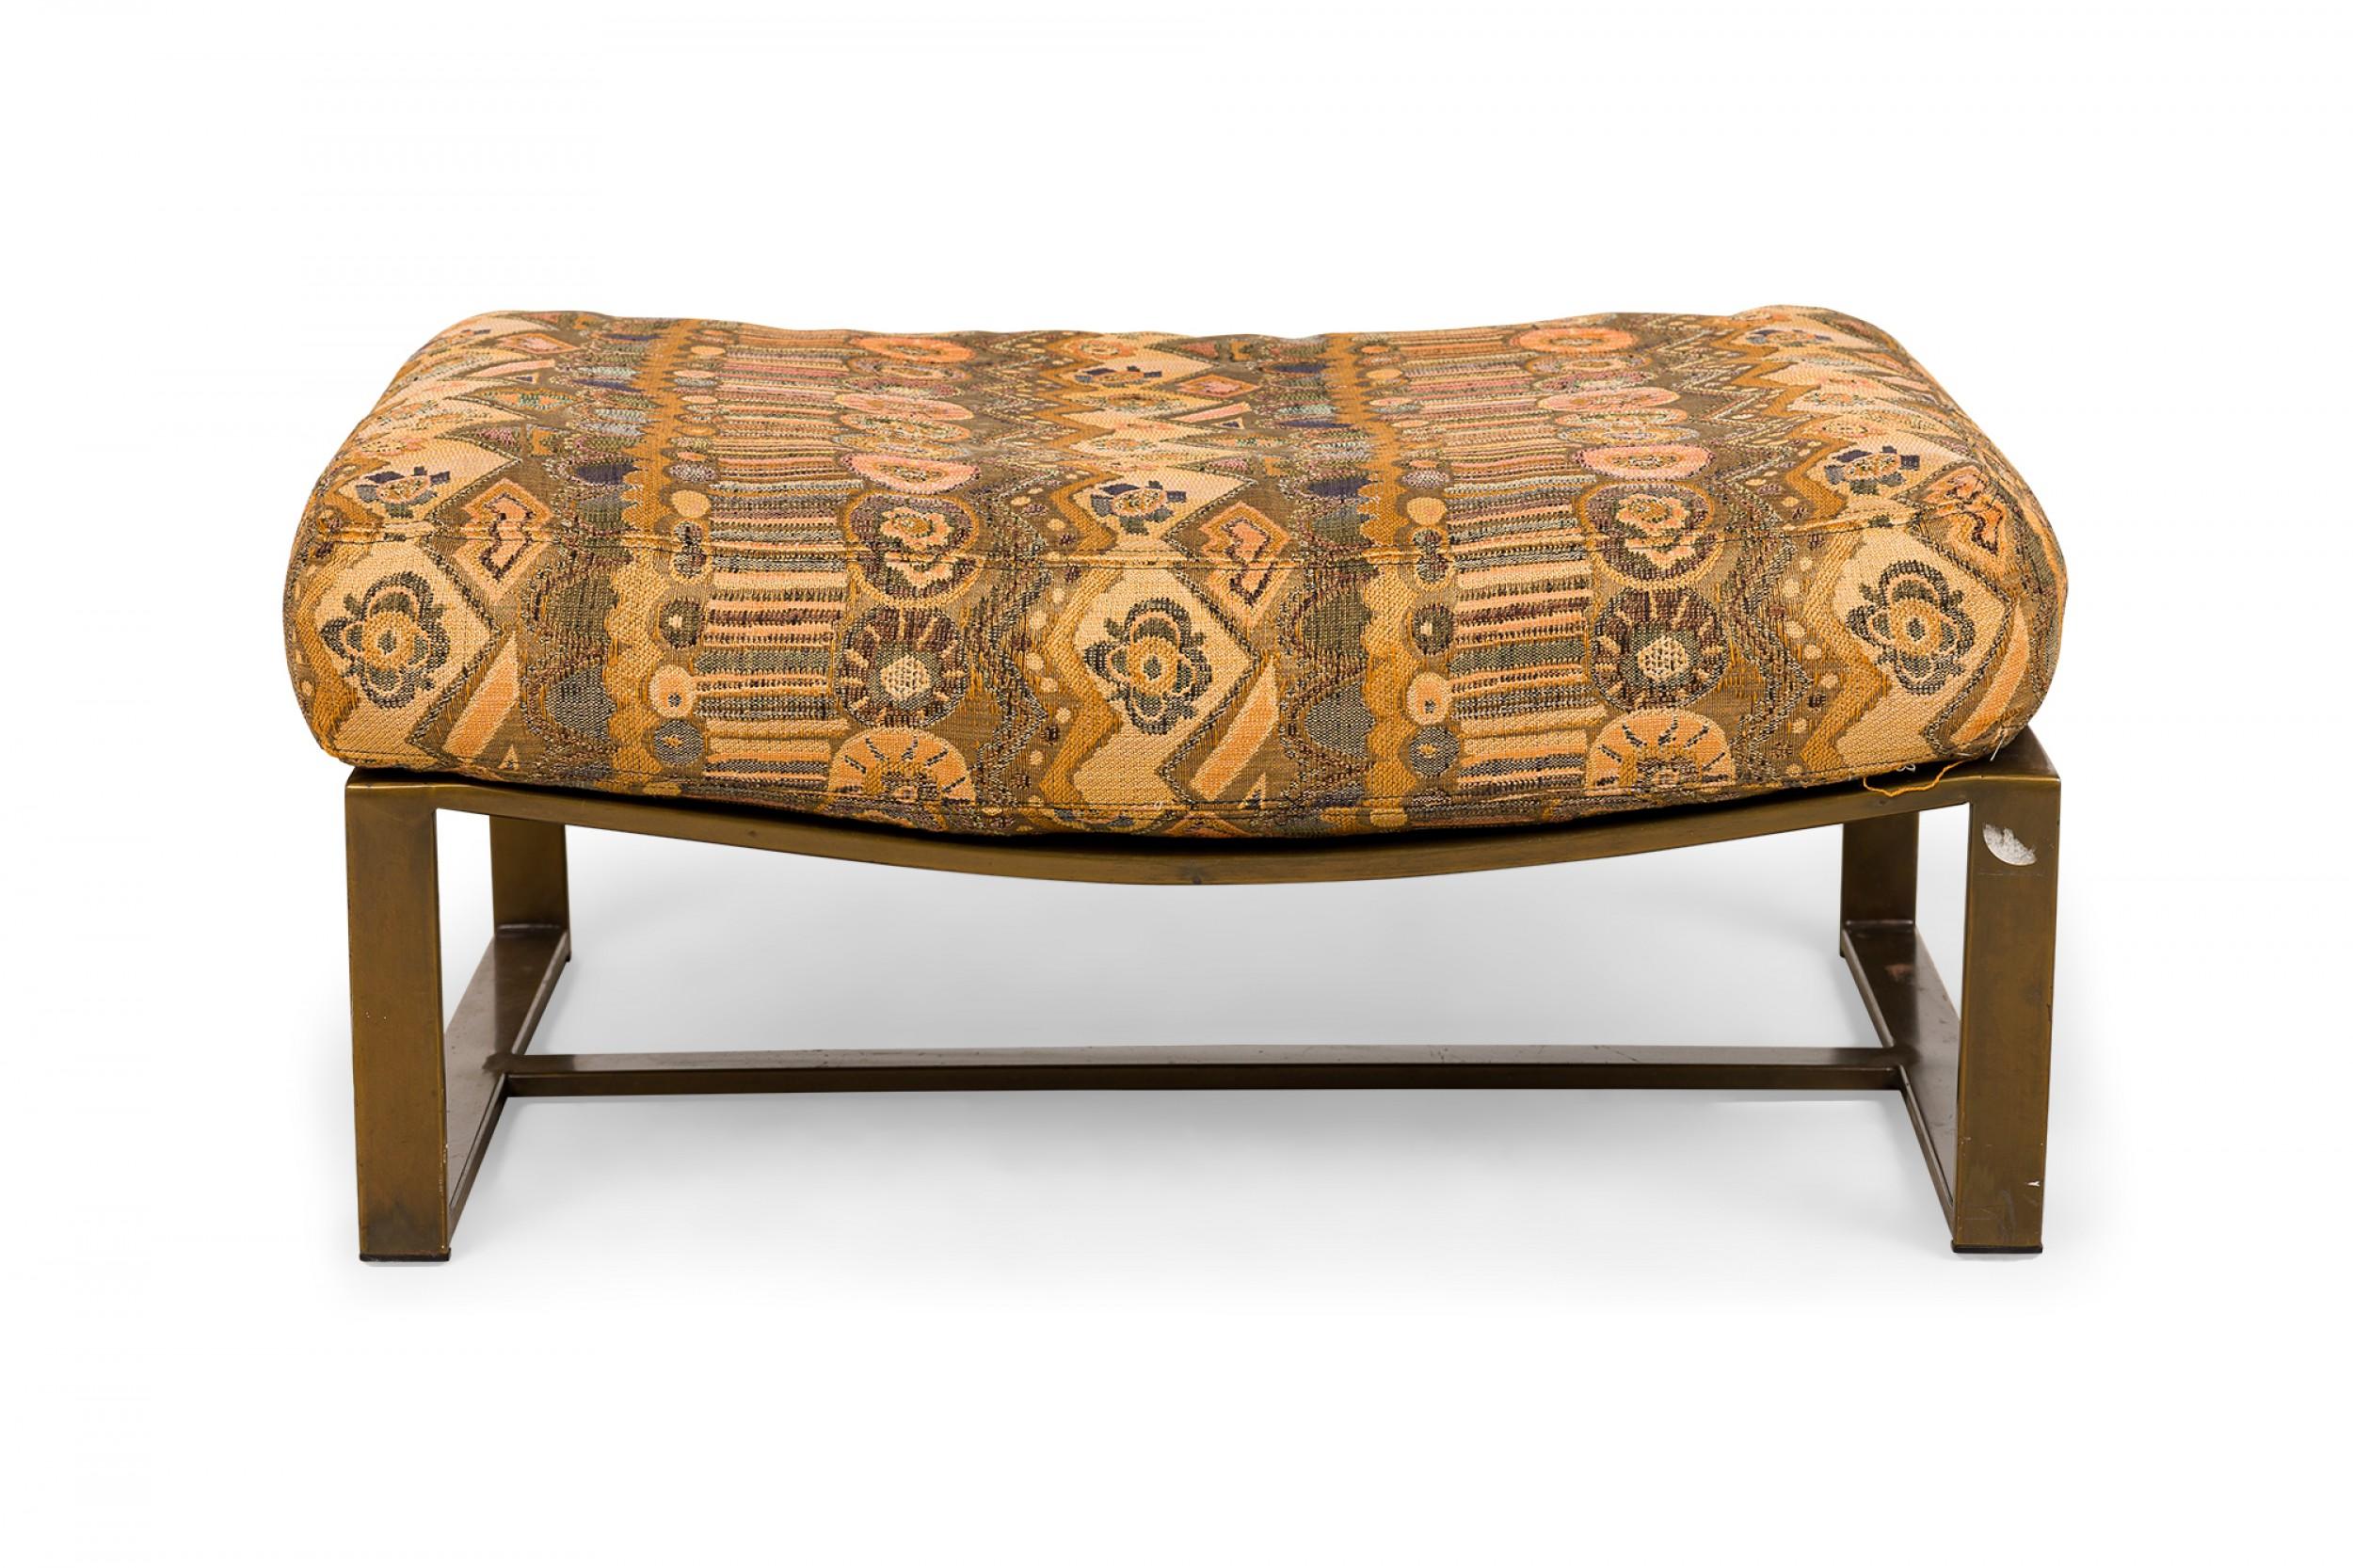 American Mid-Century rectangular ottoman with a top upholstered in an intricately patterned beige and brown fabric, resting on rectangular walnut legs with a stretcher base. (MILO BAUGHMAN FOR THAYER COGGIN)